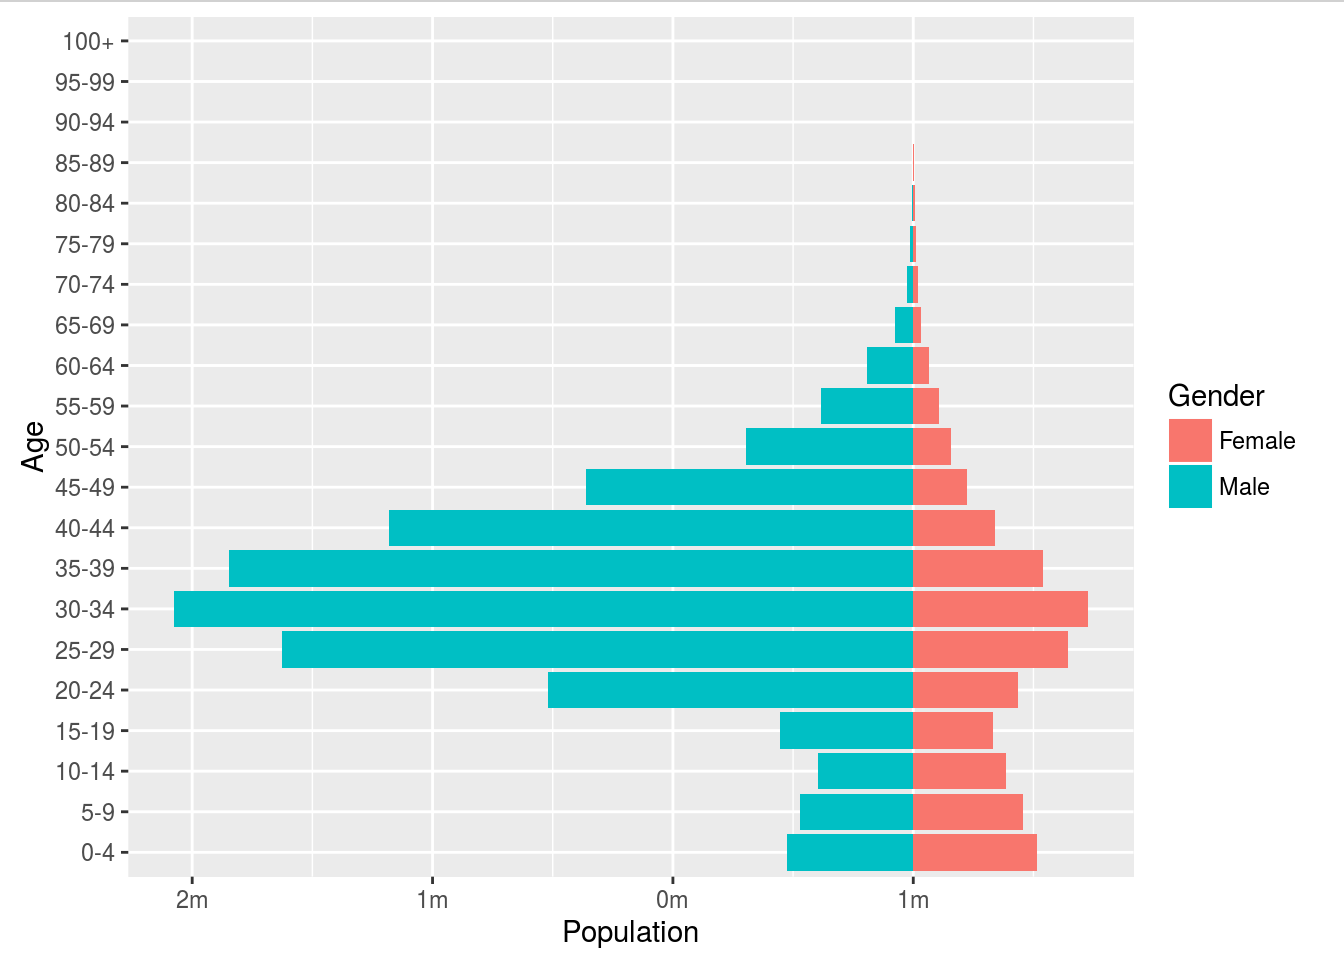 Screenshot of a graph showing a population pyramid for Ghana based on 2015 data, generated using the ggplot2 R library